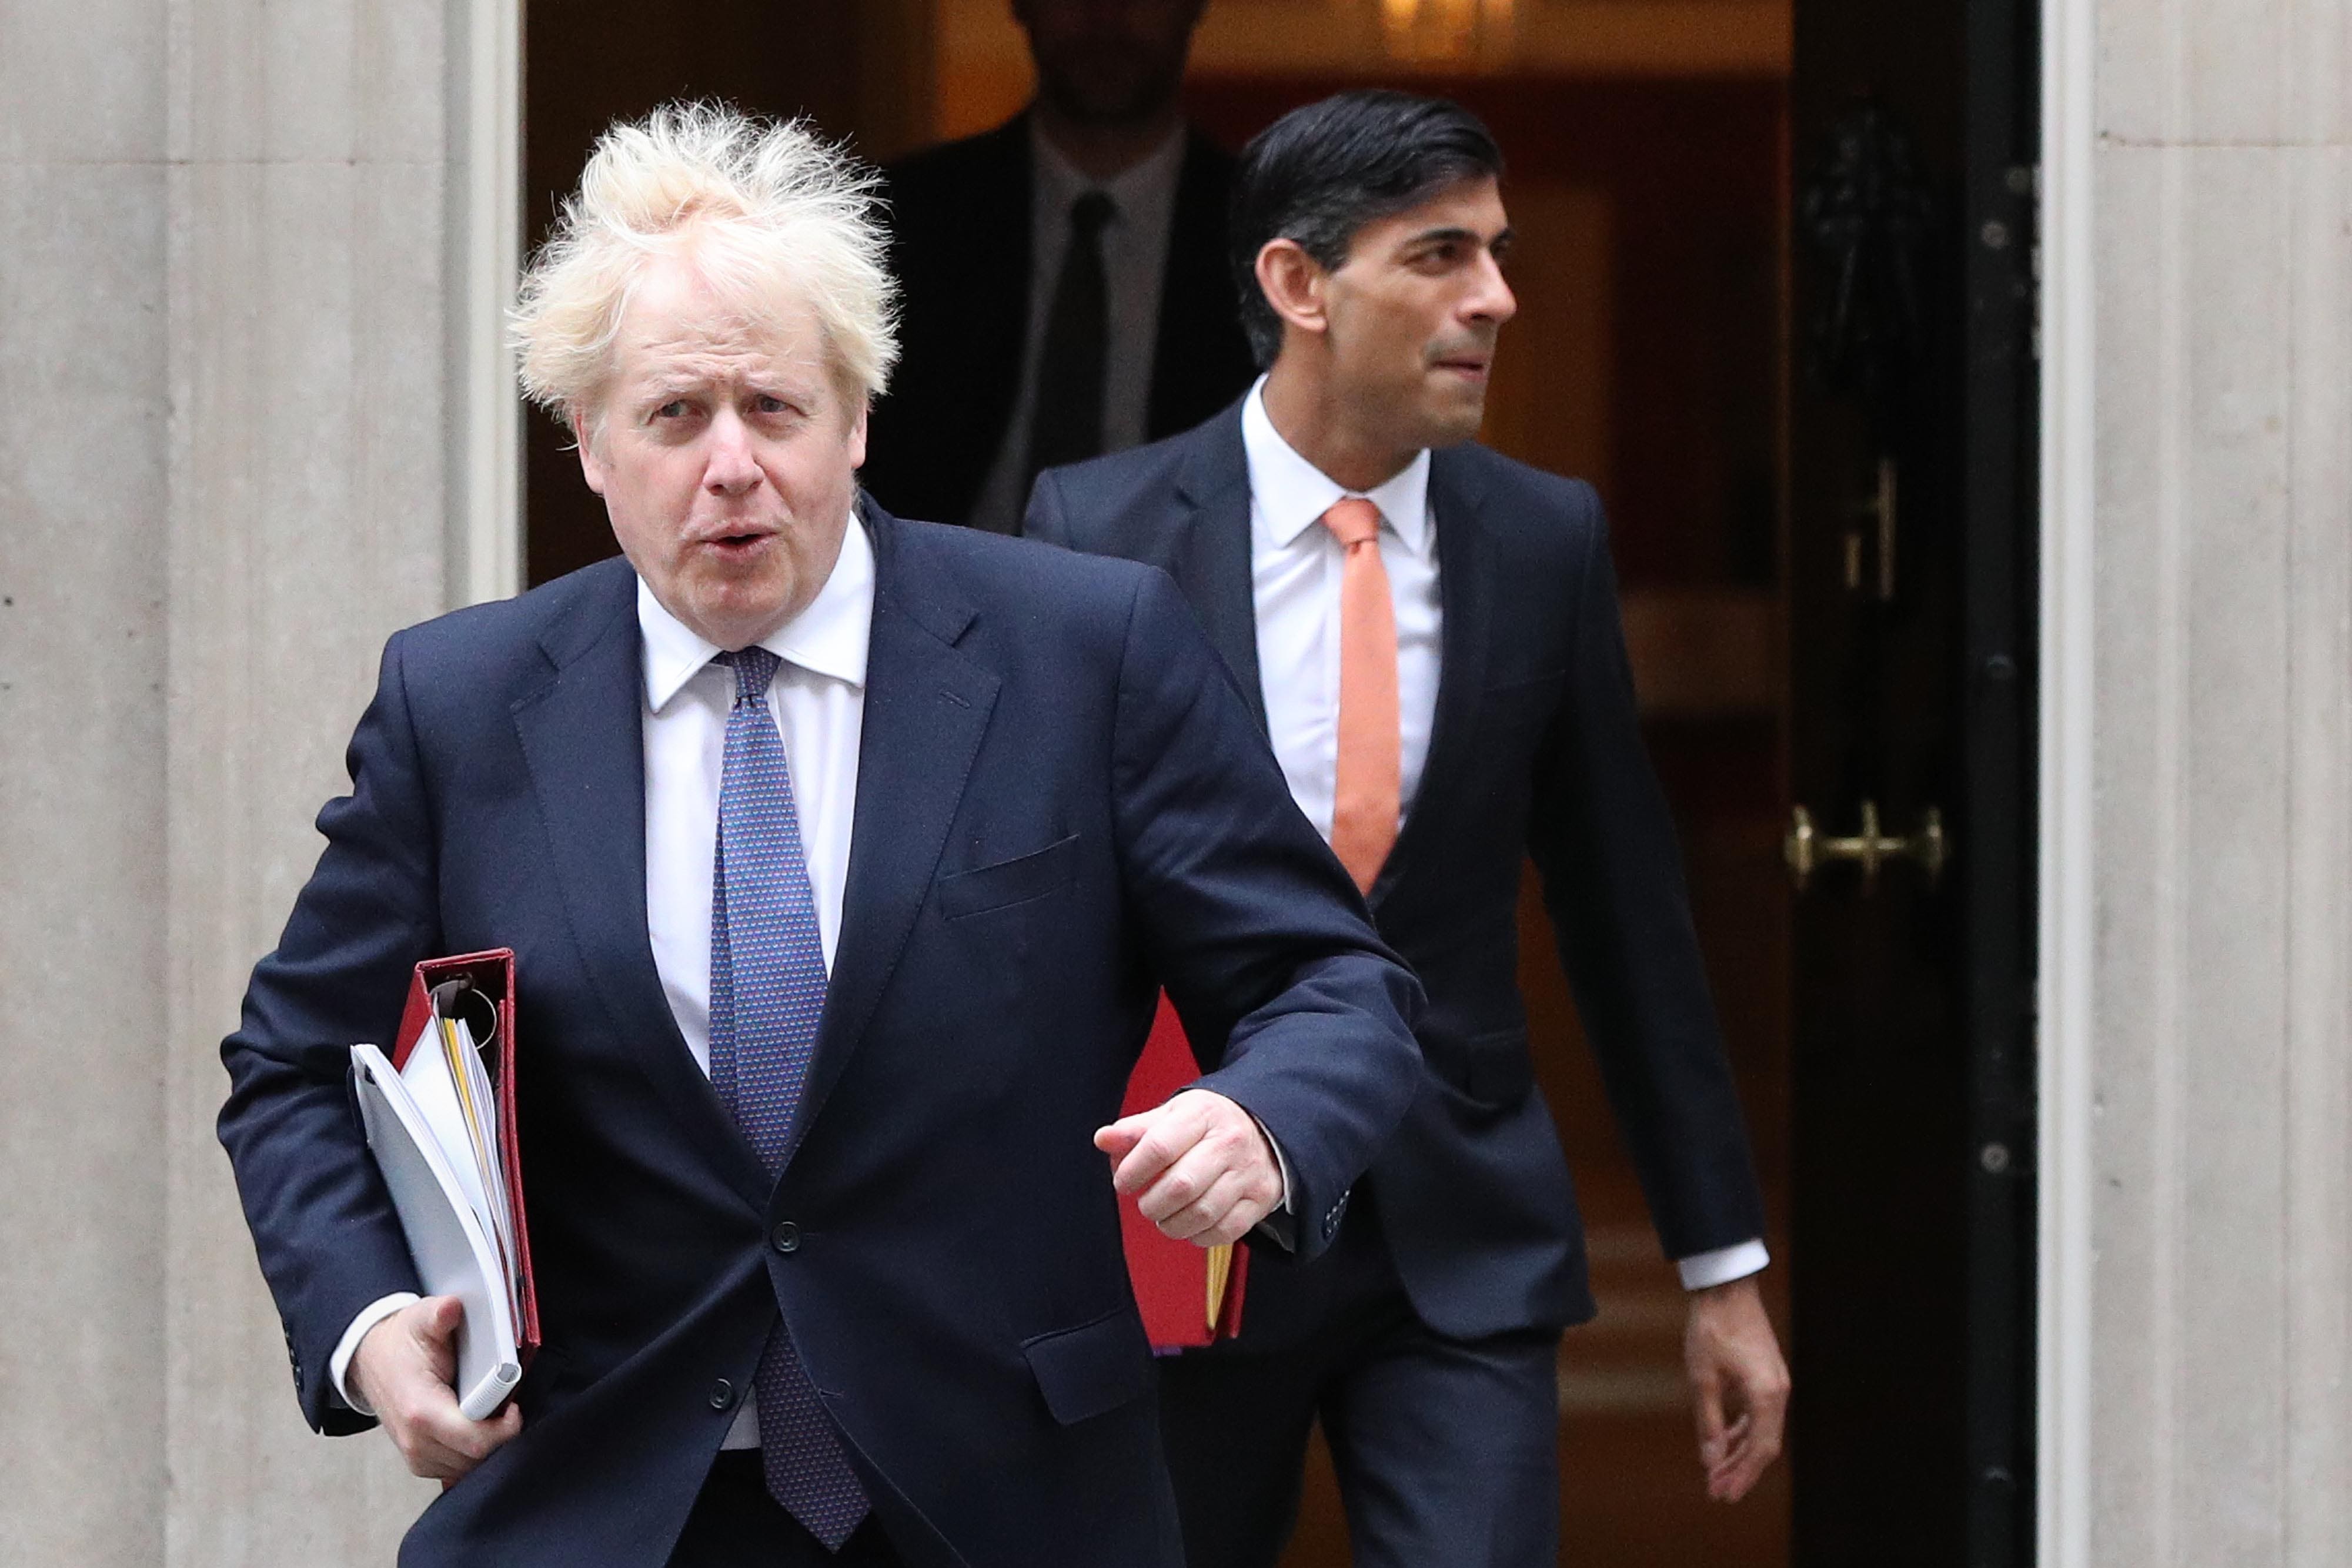 Boris Johnson and Rishi Sunak leave 10 Downing Street in 2020 when they were prime minister and chancellor, respectively